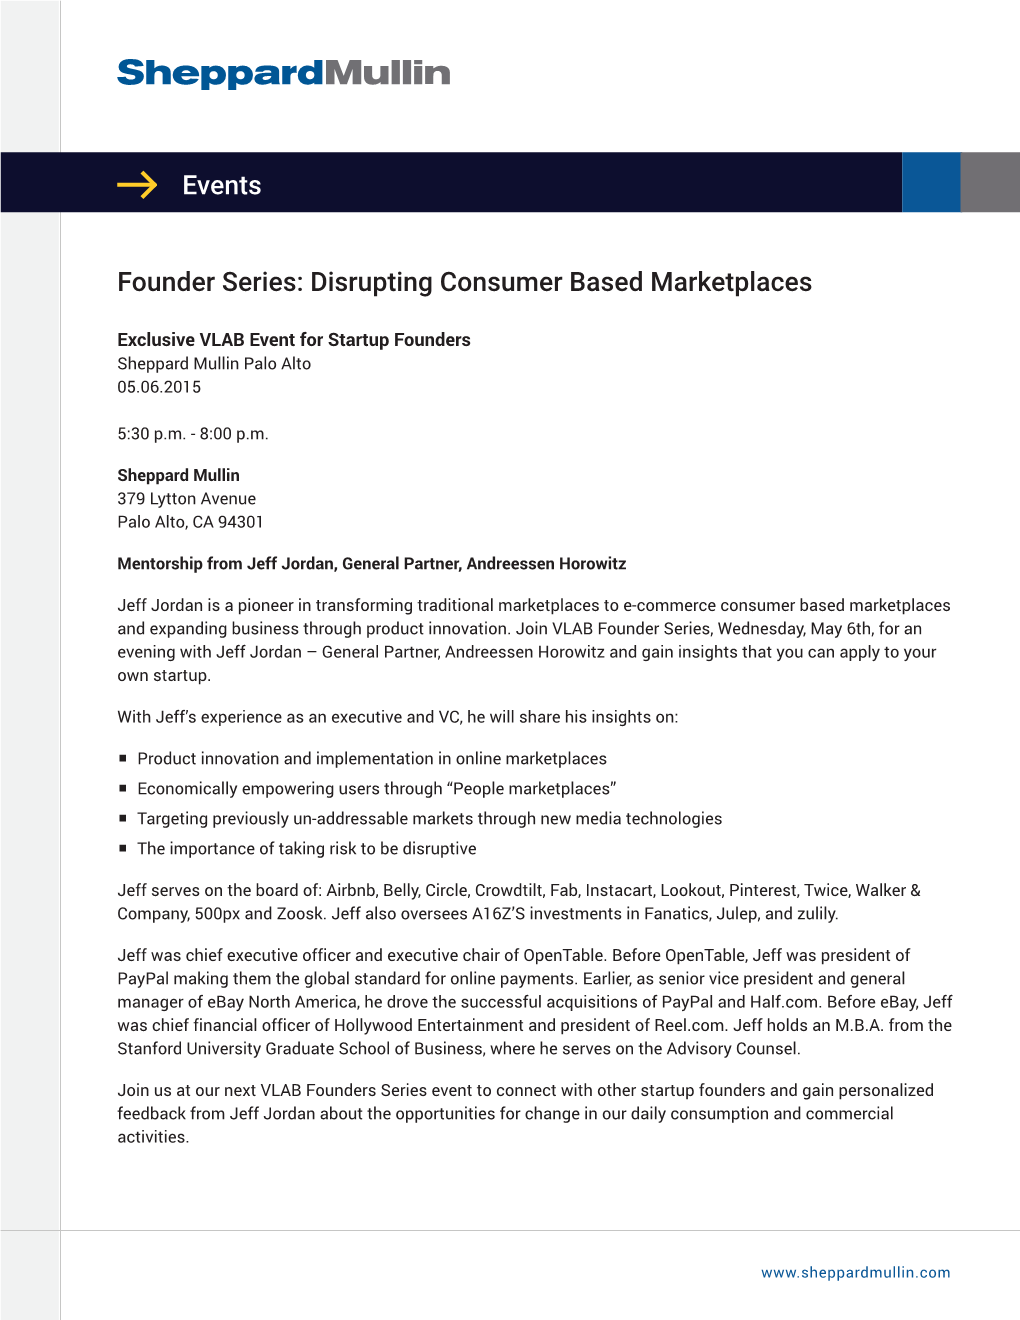 Events Founder Series: Disrupting Consumer Based Marketplaces